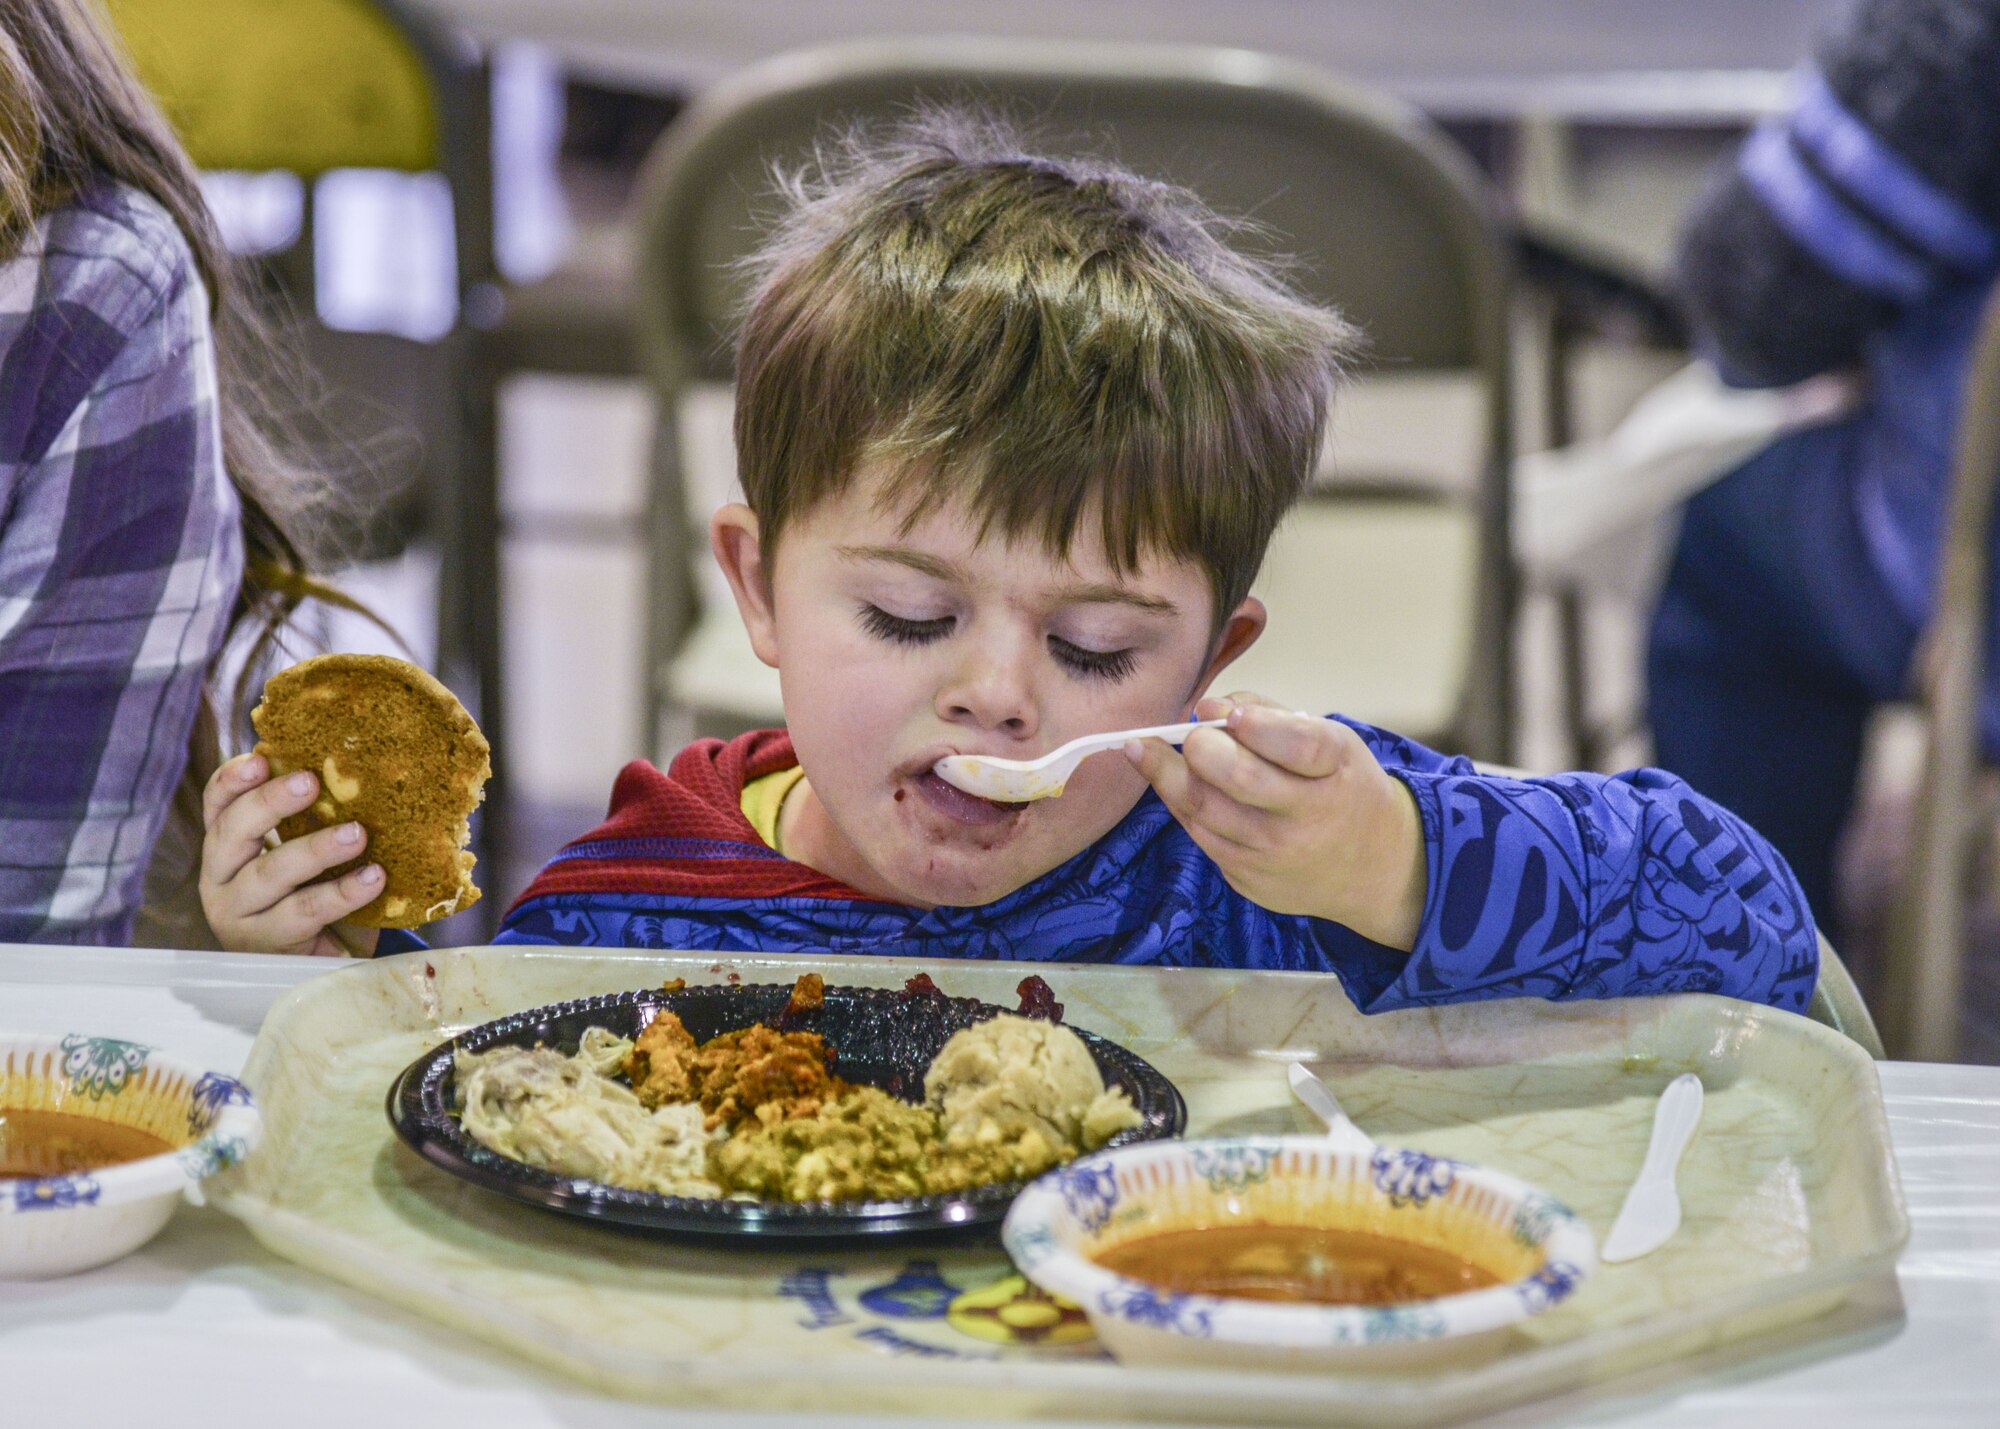 A child eats his holiday meal at the annual Operation Holiday Cheer on Dec. 20 at Kirtland Air Force Base, New Mexico. This event is hosted by the Kirtland Fire Department and serves underprivileged families in the local communities by giving them a full holiday meal and a visit with Santa, who sends them home with a gift.